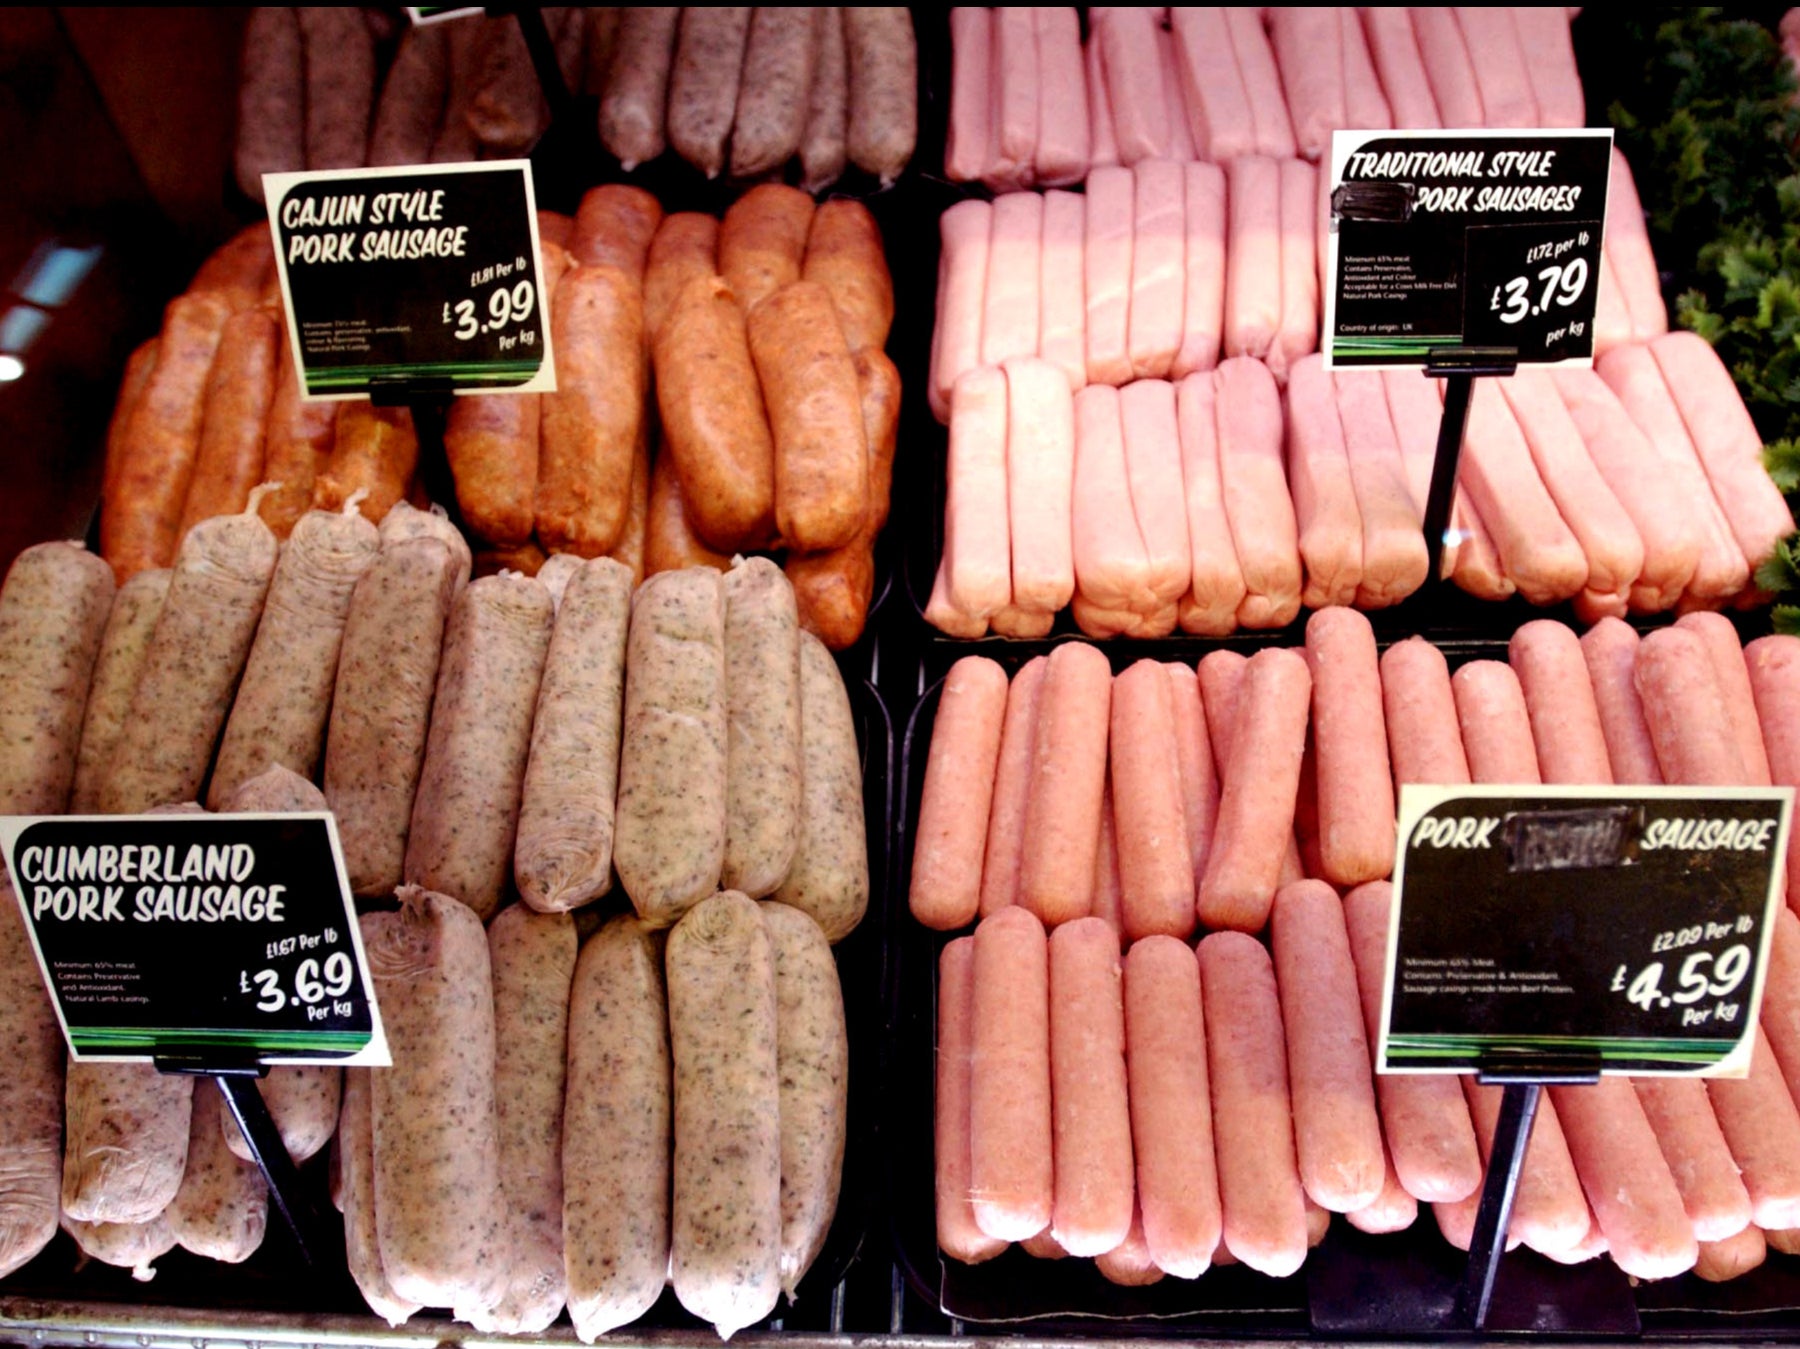 Sausages on display in a supermarket